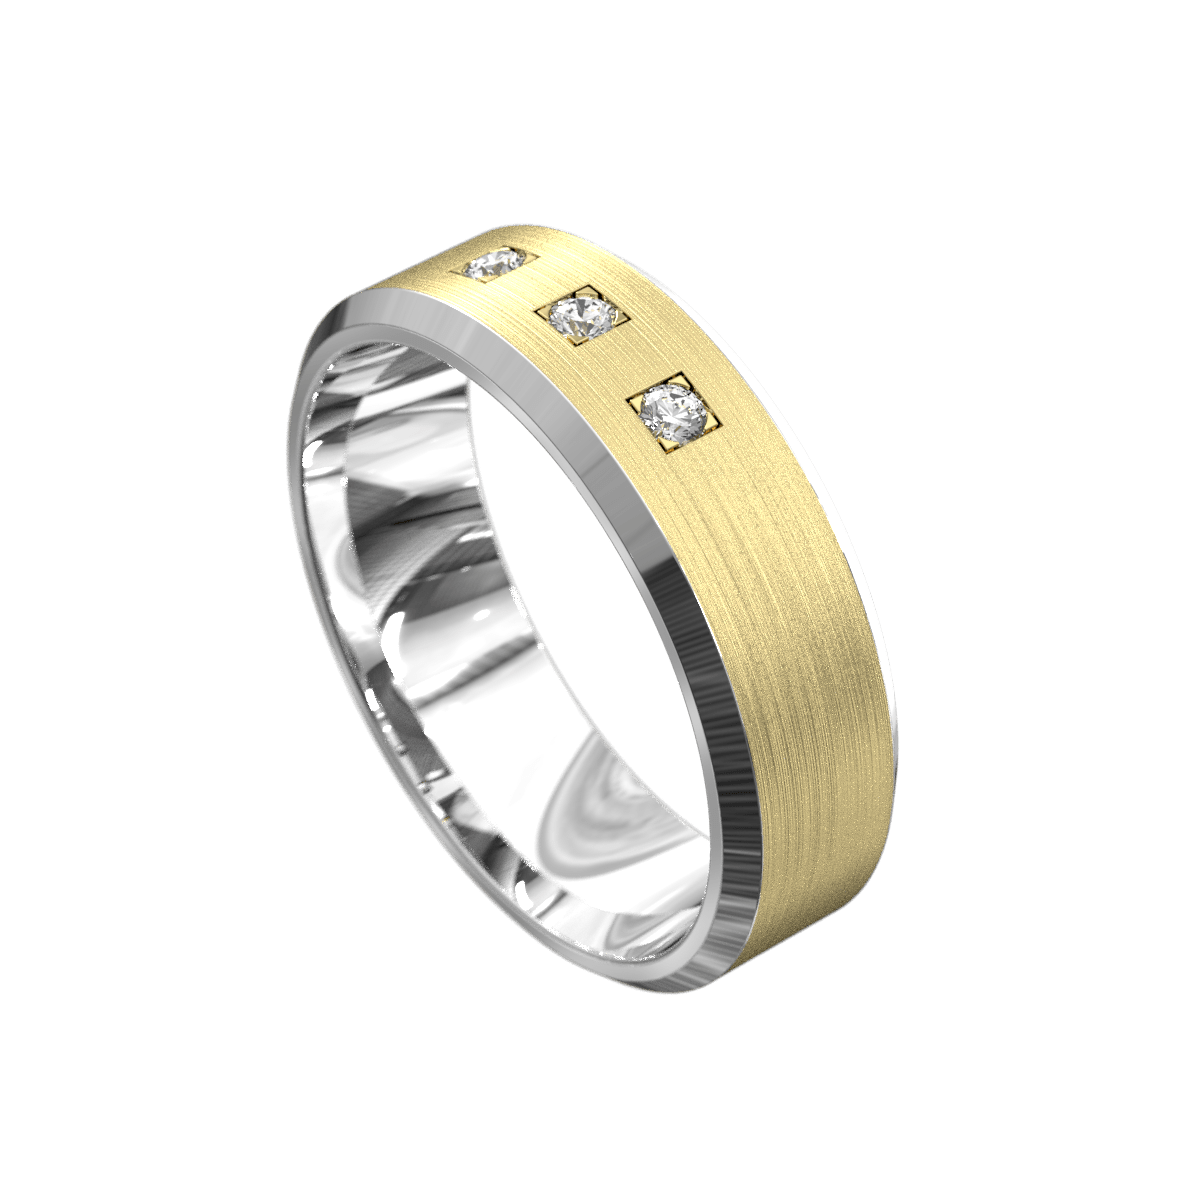 Artfully Crafted White & Yellow Gold Men's Wedding Ring